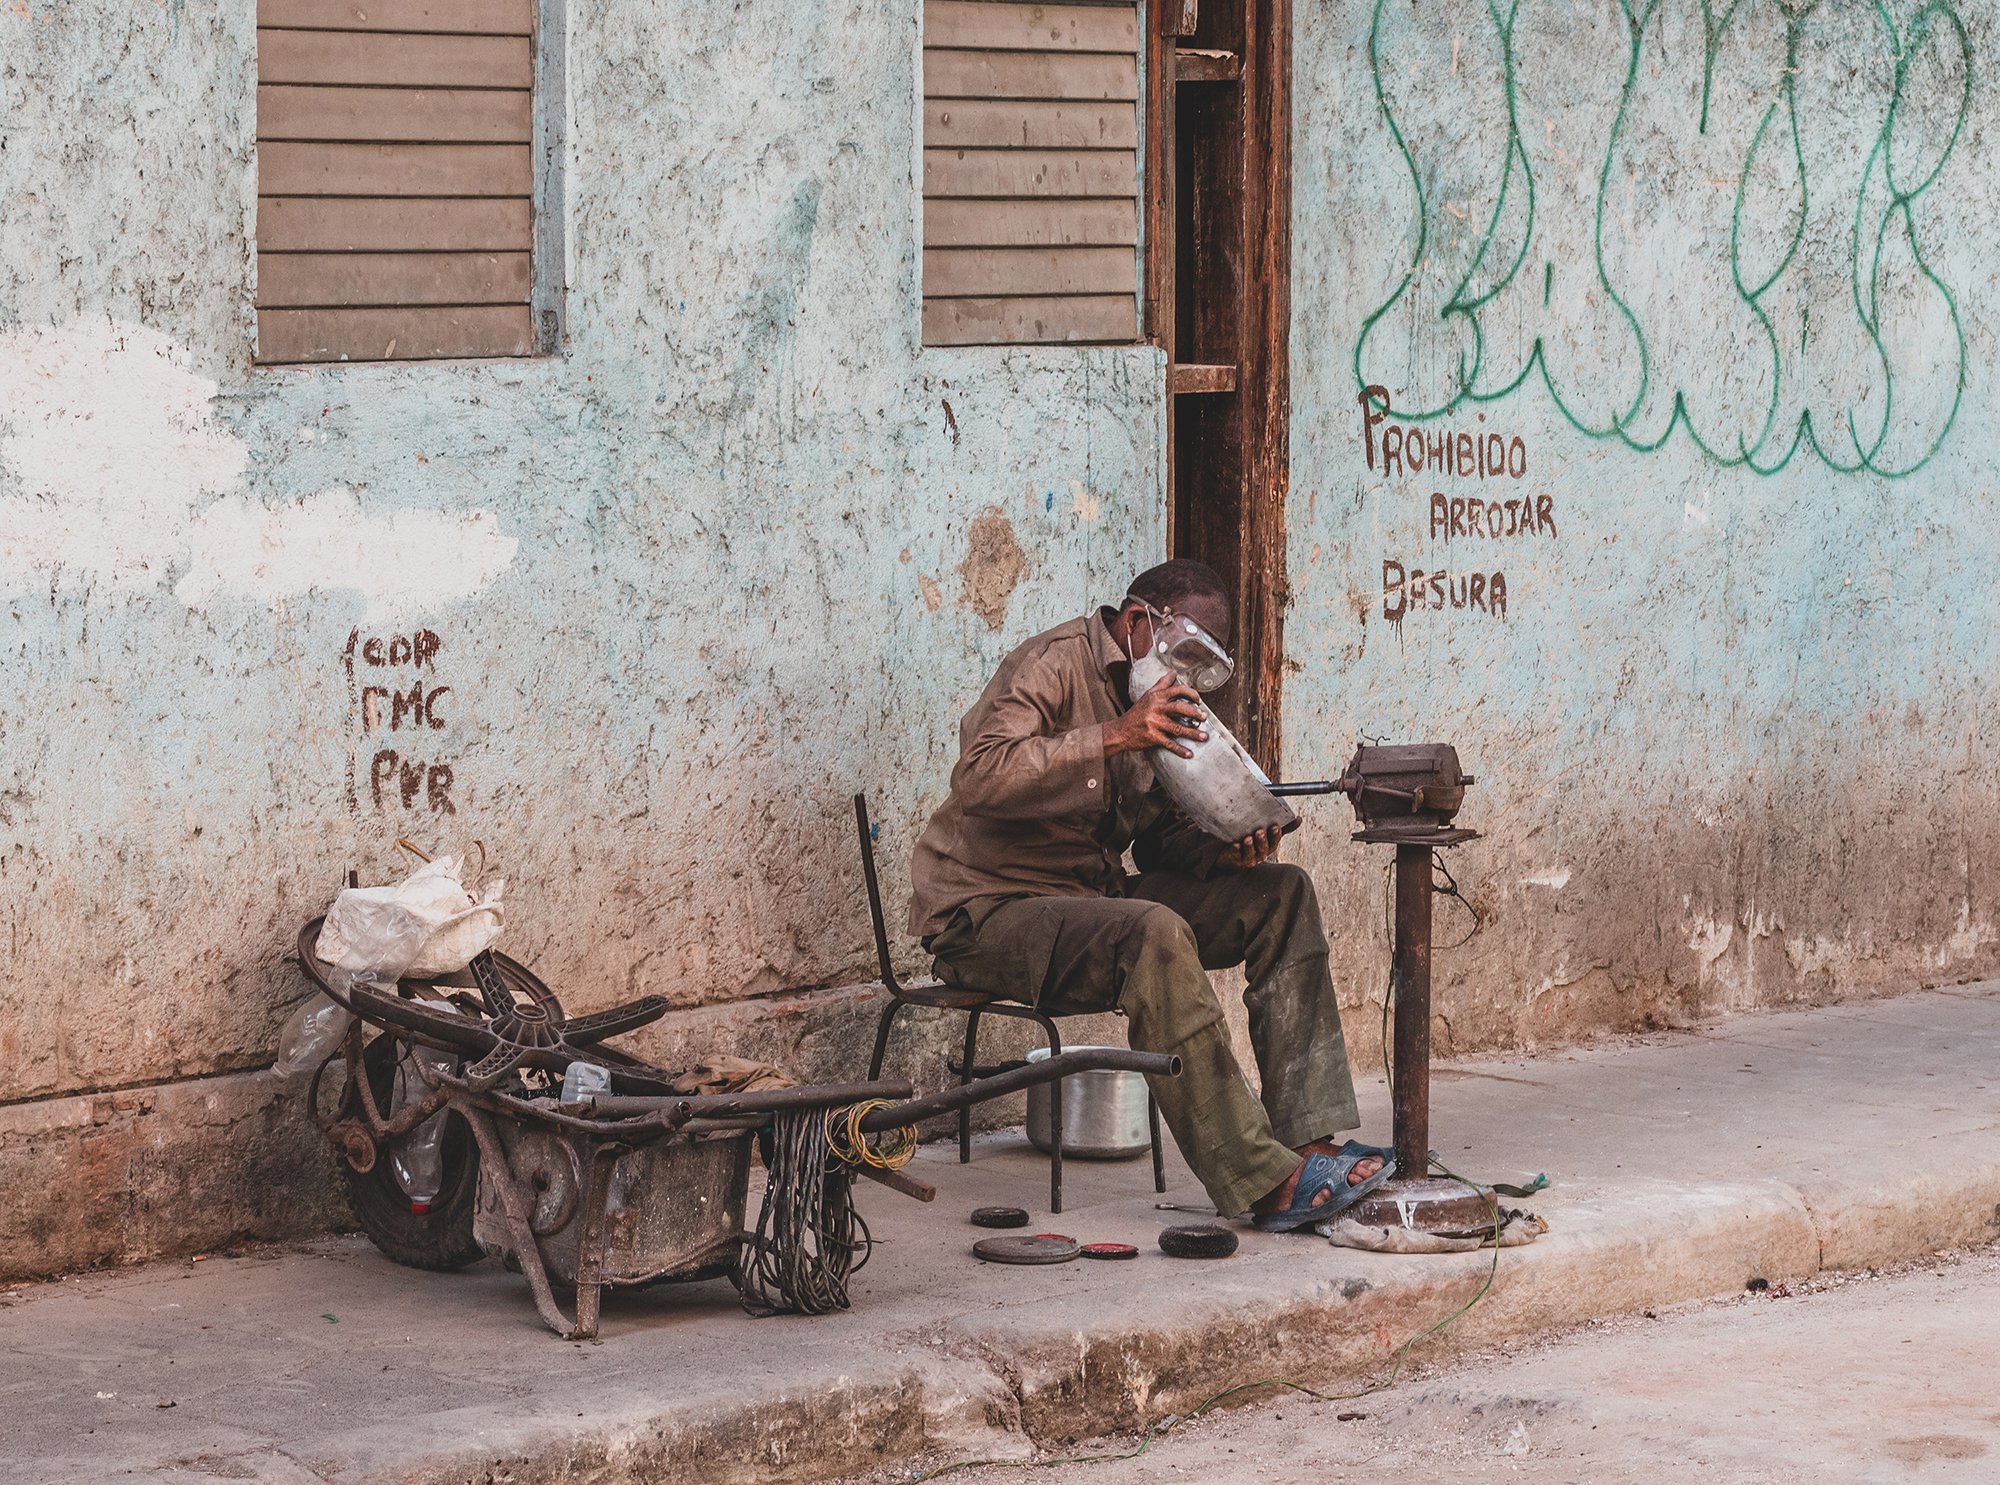 A worker in Havana has a covid-19 mask while tending a pot with his small machine on the street.